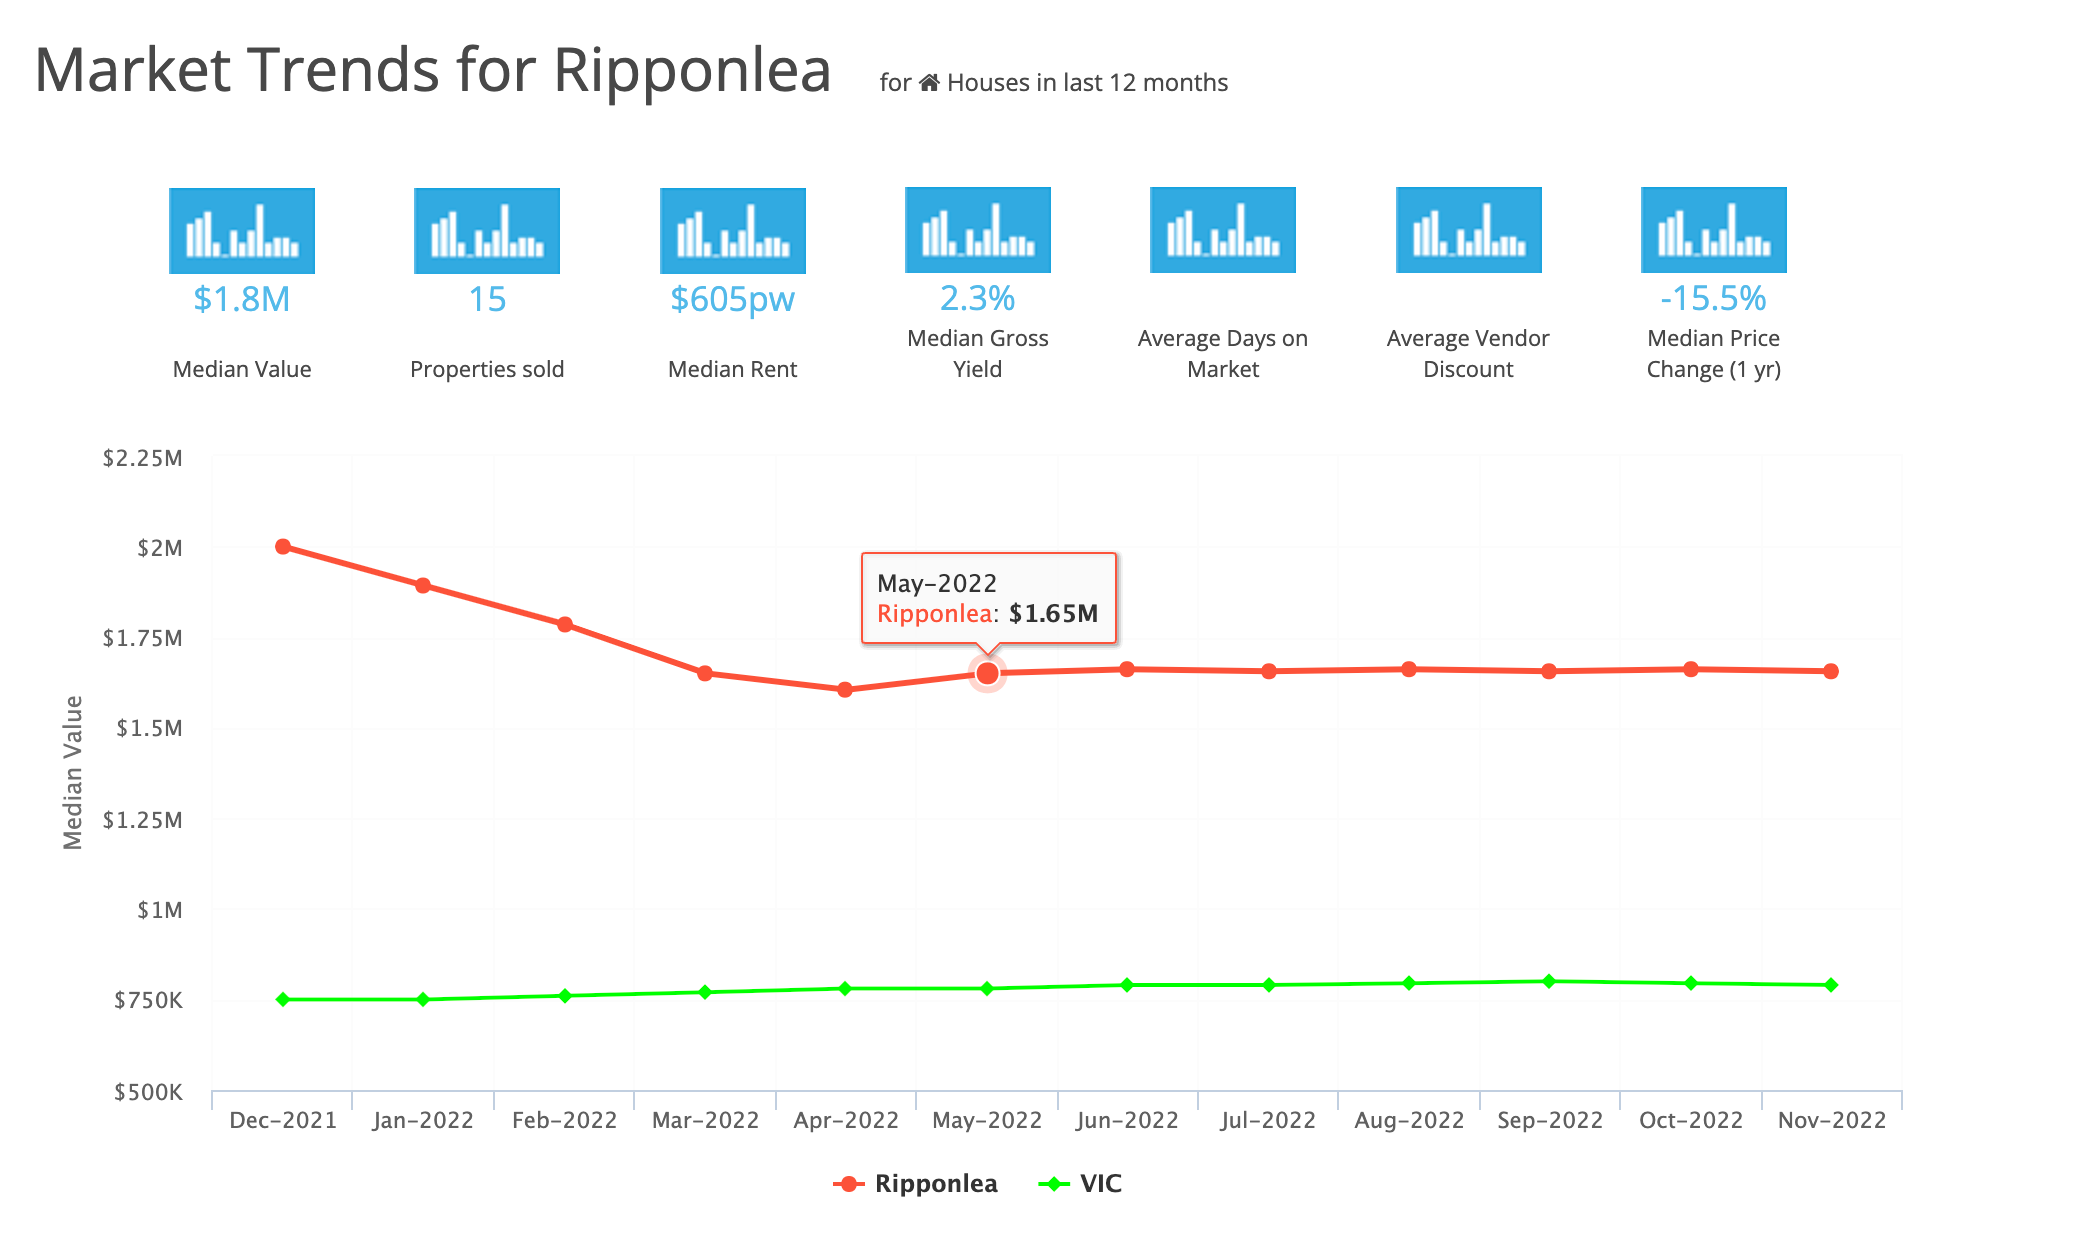 Market Trends for Ripponlea March 2023